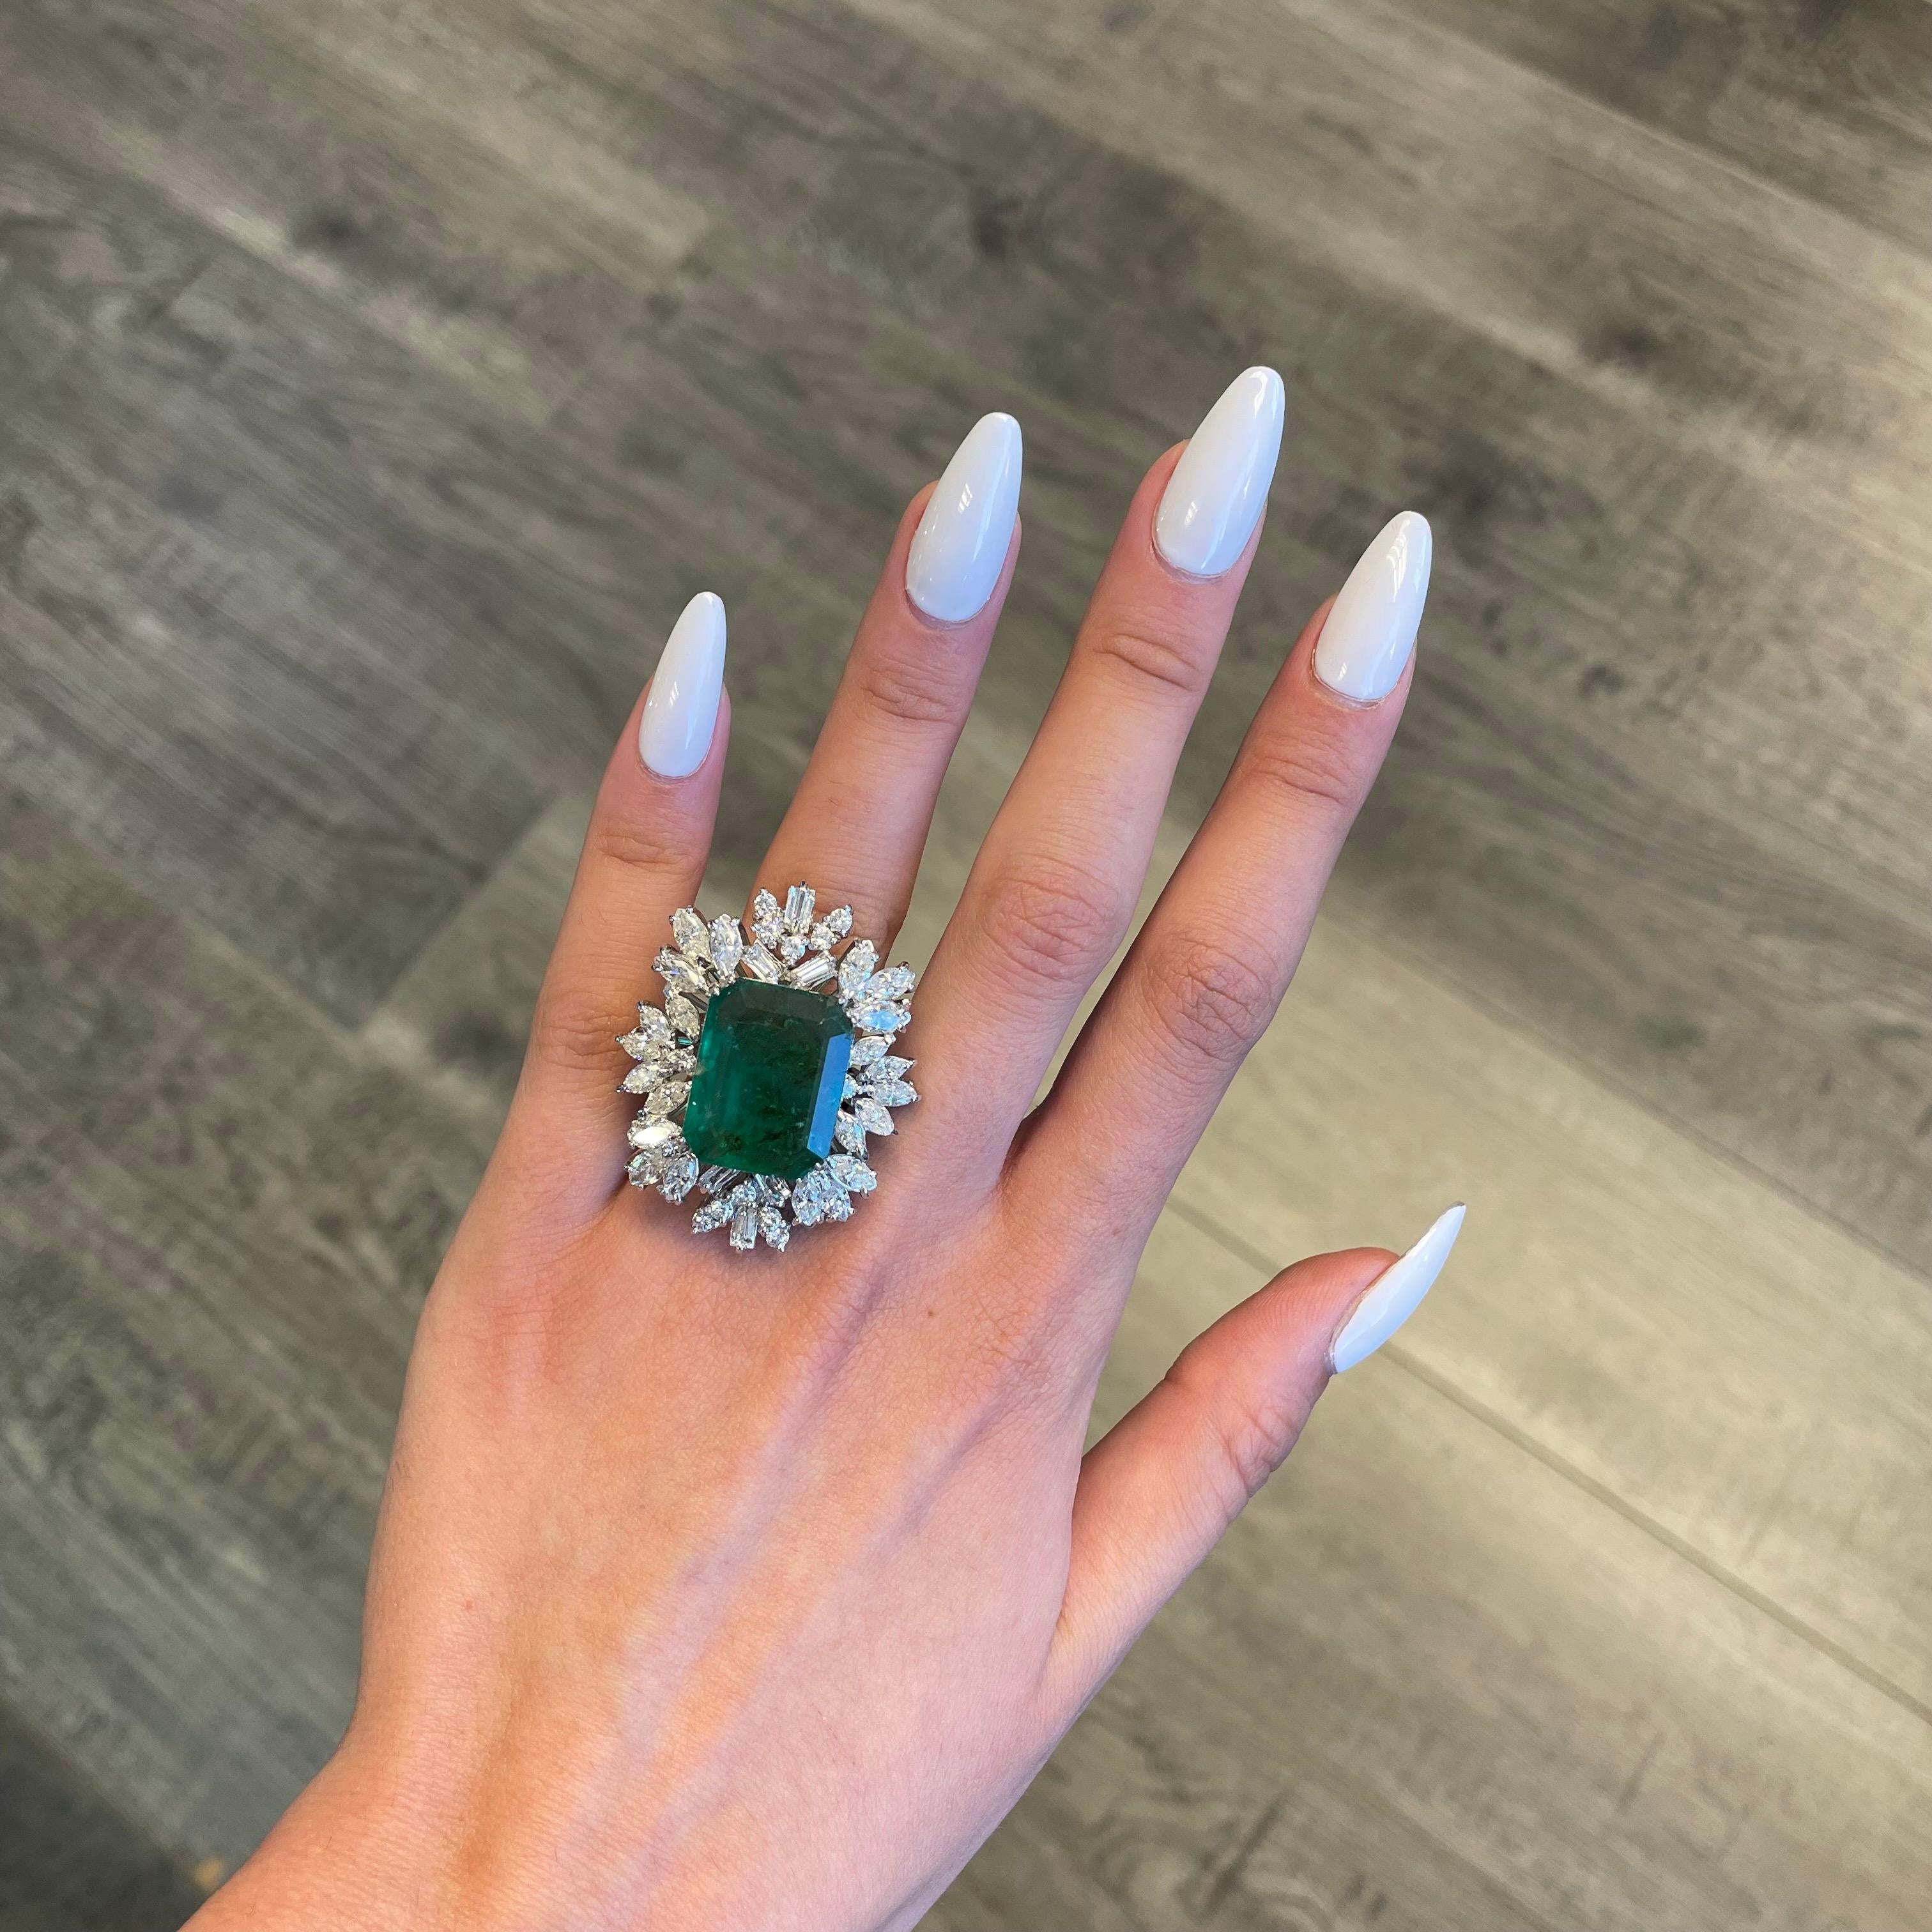 Vintage emerald with diamonds ring, circa 1970's.  
Approximately 14.10ct emerald apx F2 surrounded by apx 5.35ct of round, marquise, and baguette diamonds. Apx 19.45ct total gemstone weight, set in 18k white gold. 
Accommodated with an up to date